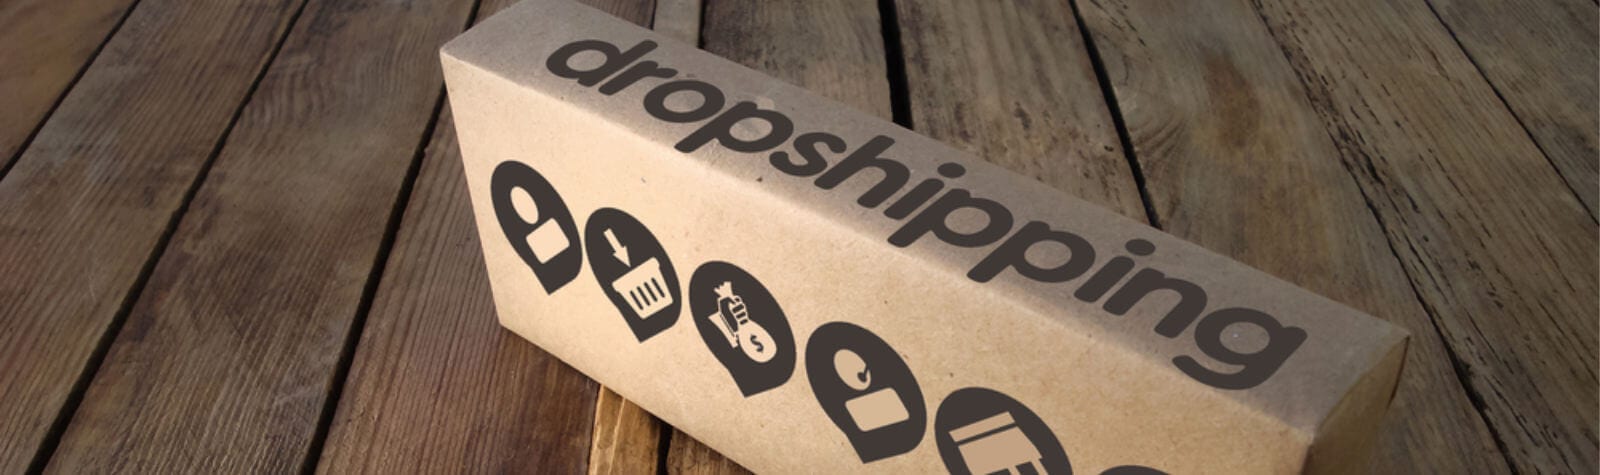 Should You Use Dropshipping For Your eCommerce Store?